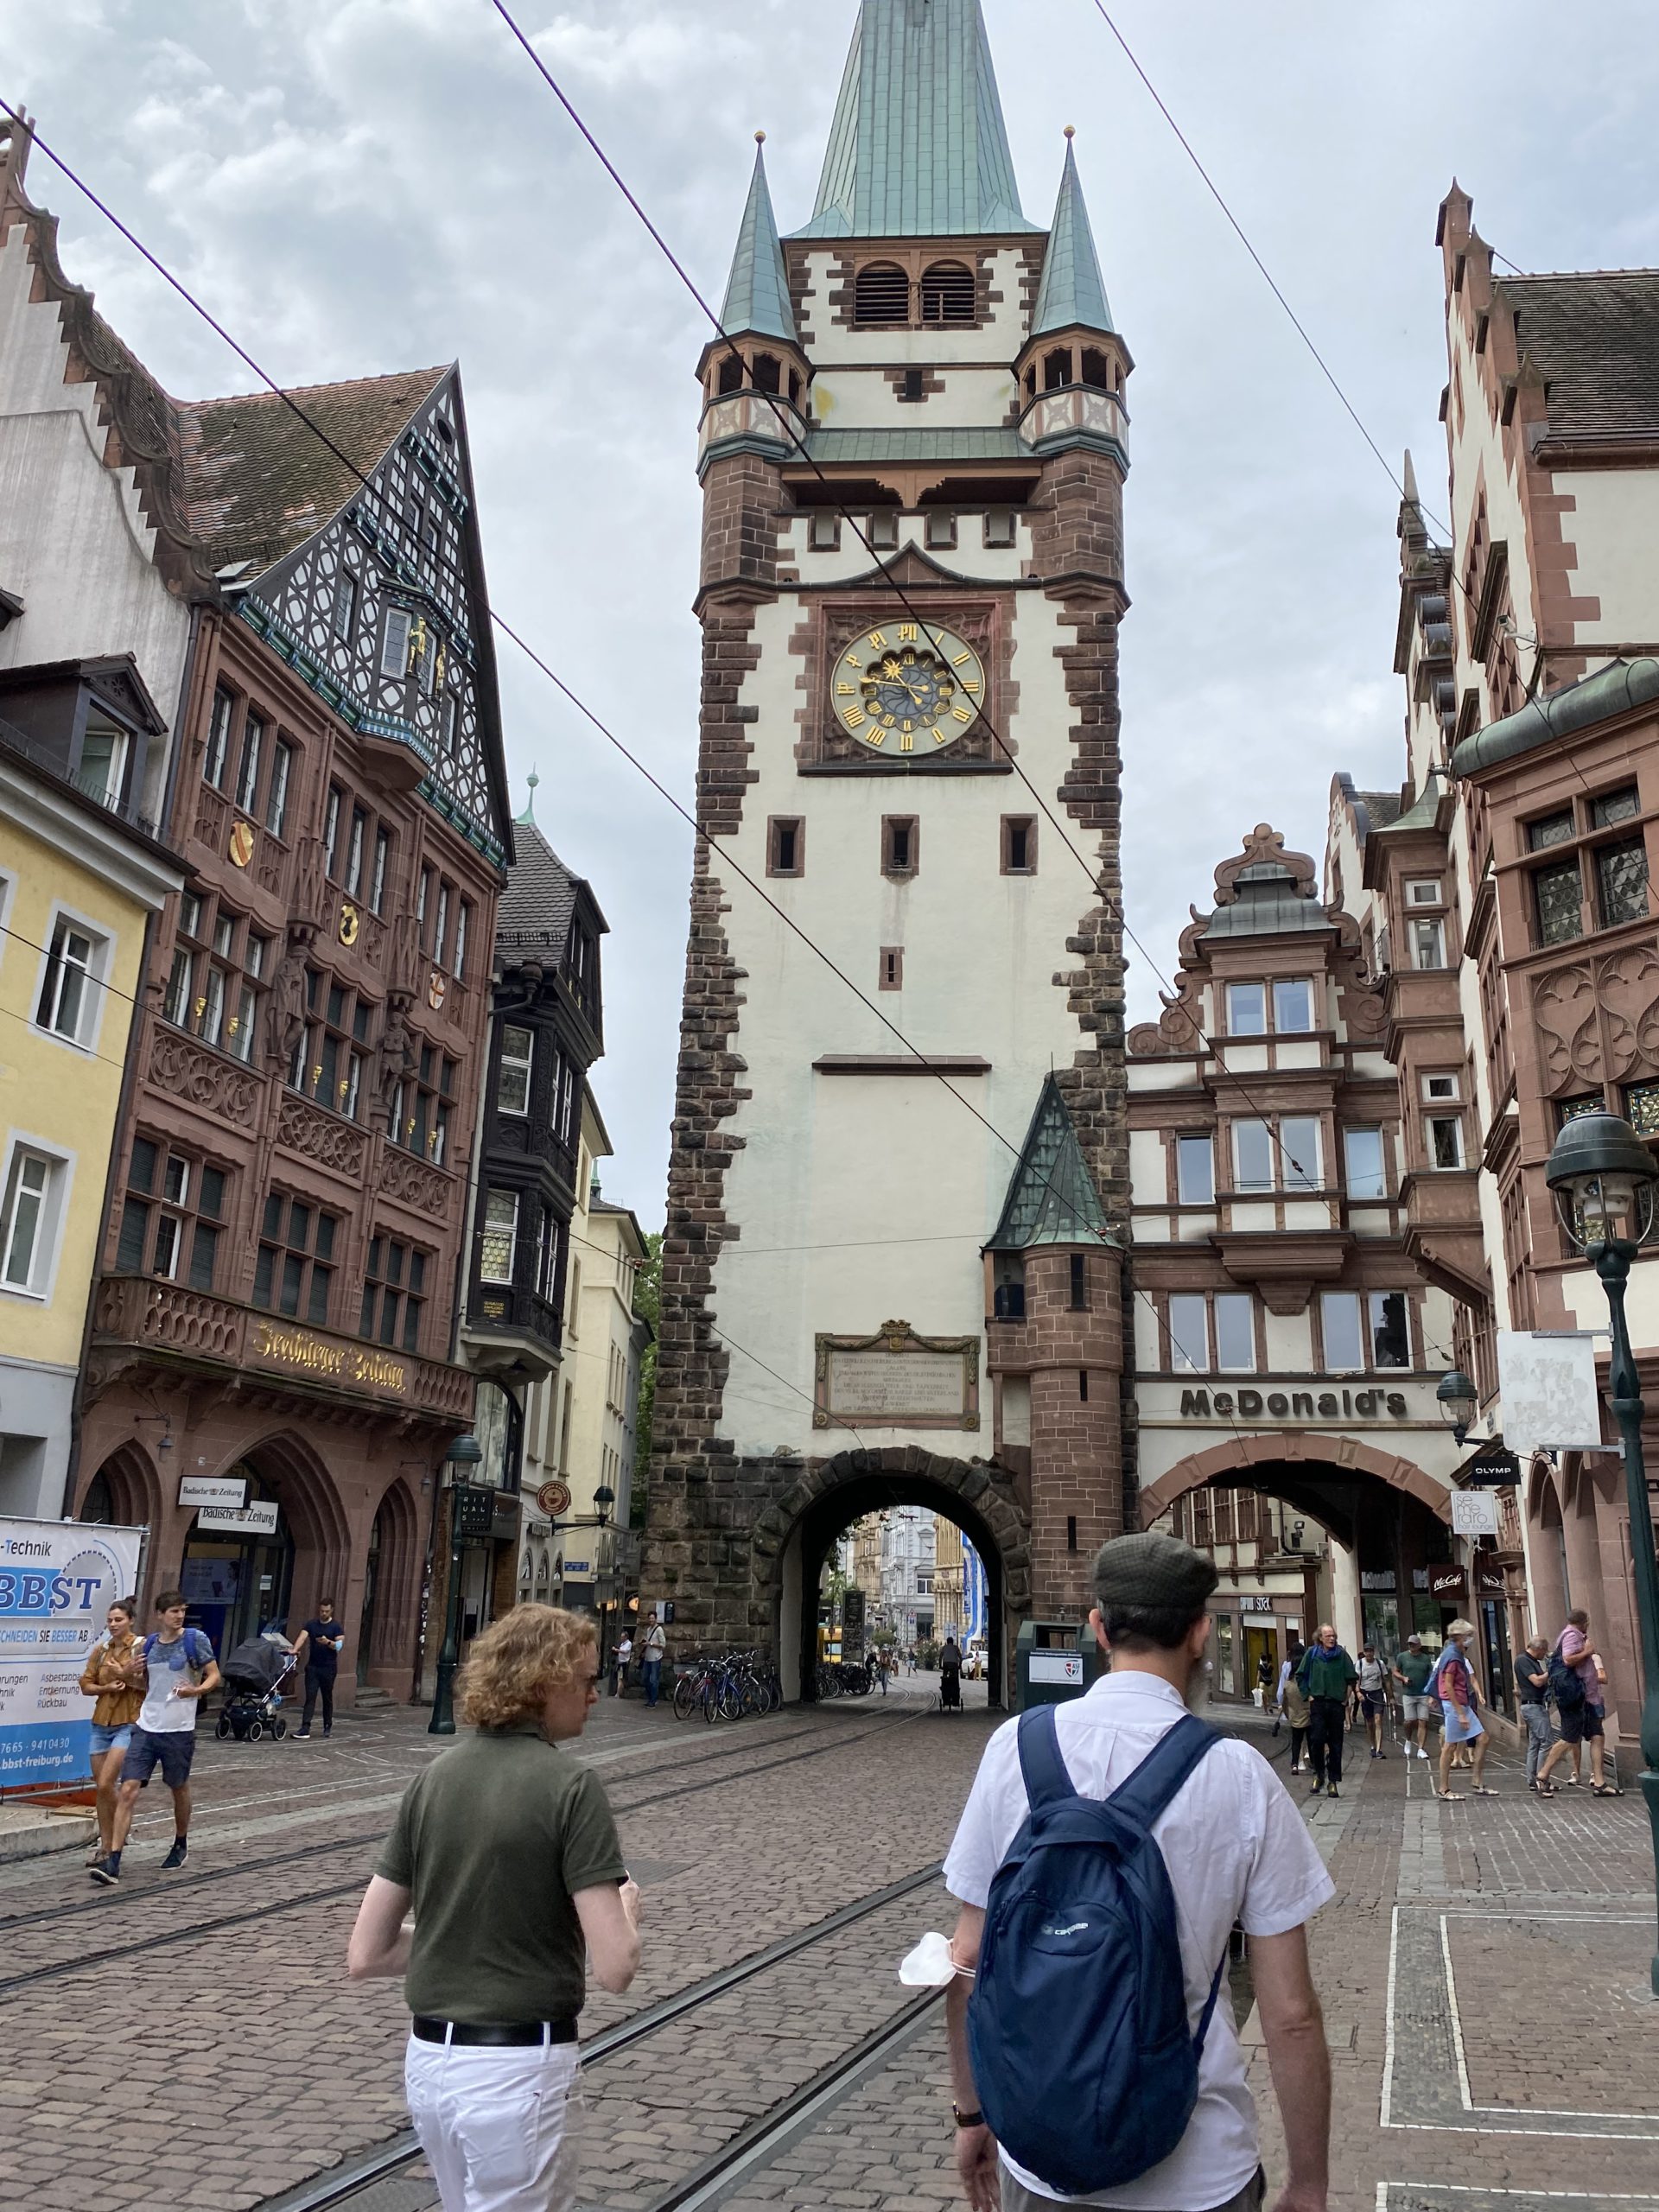 The old town in Freiburg